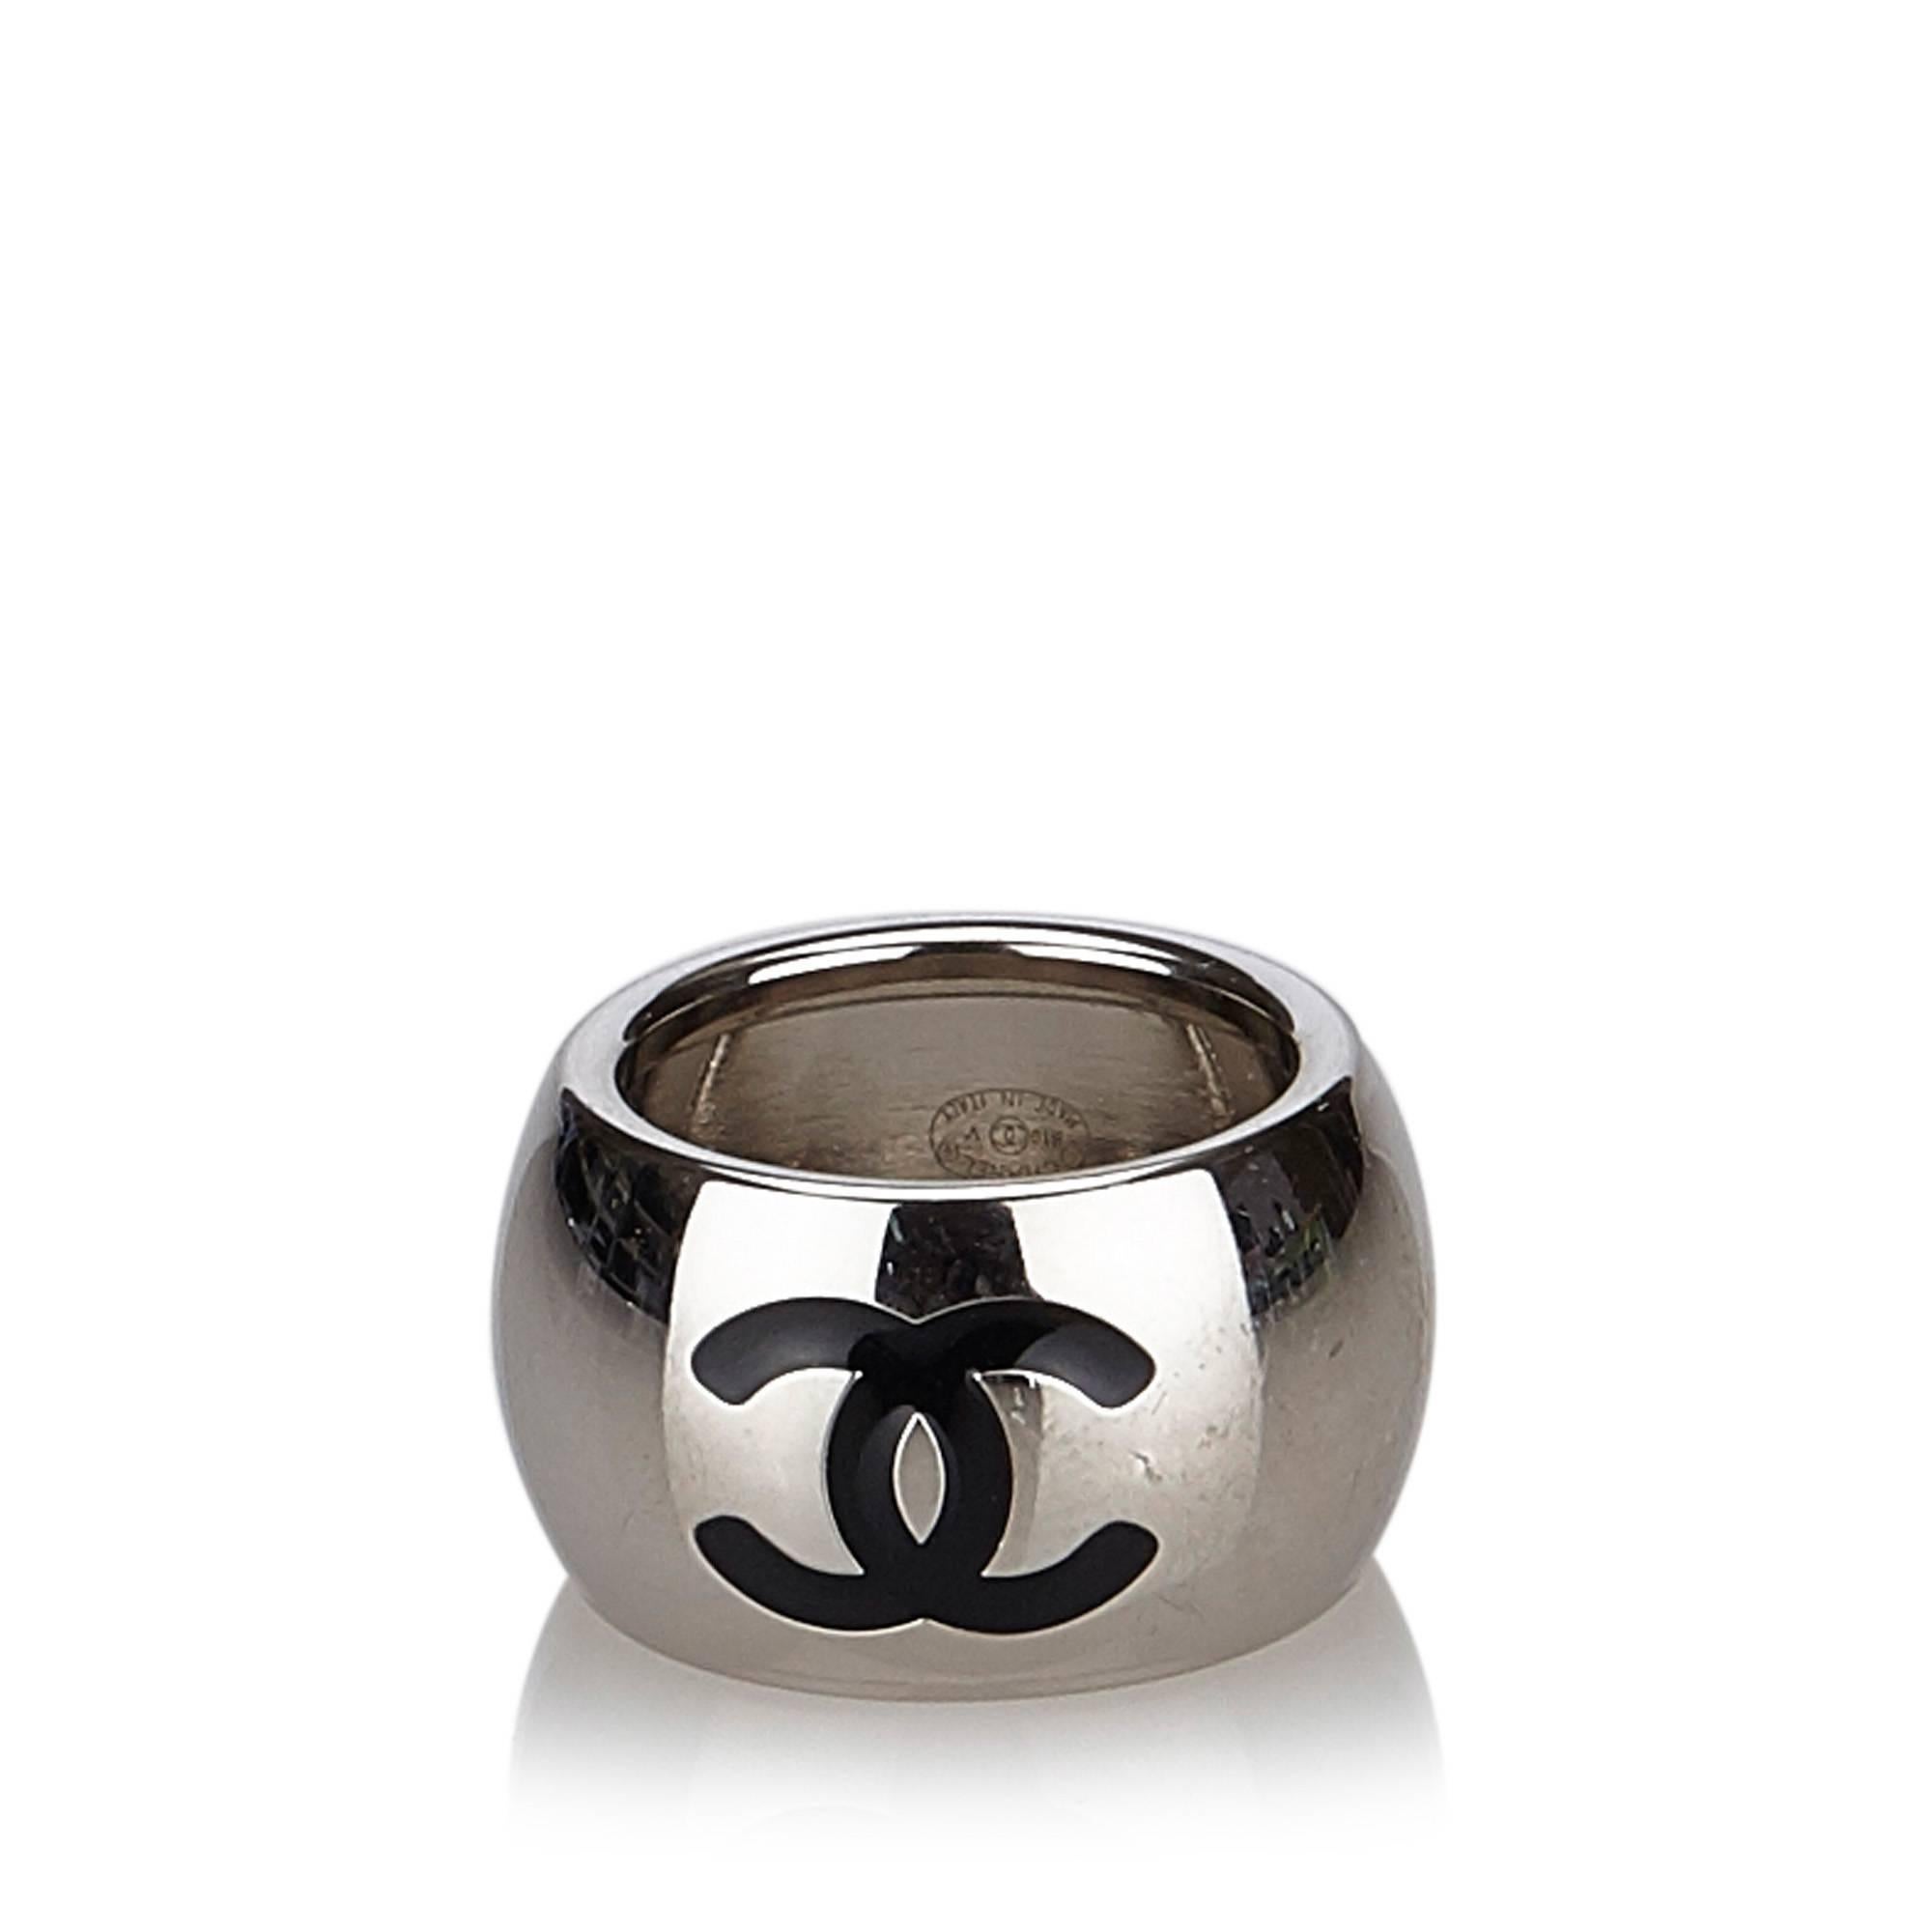 - This Chanel black "CC" heart ring features a silver metal hardware. Featuring a black 'CC" logo on the other side as well. Love the simplicity and design of this ring that you can wear it two sides. 

- Made in France. 

- Size:14cm